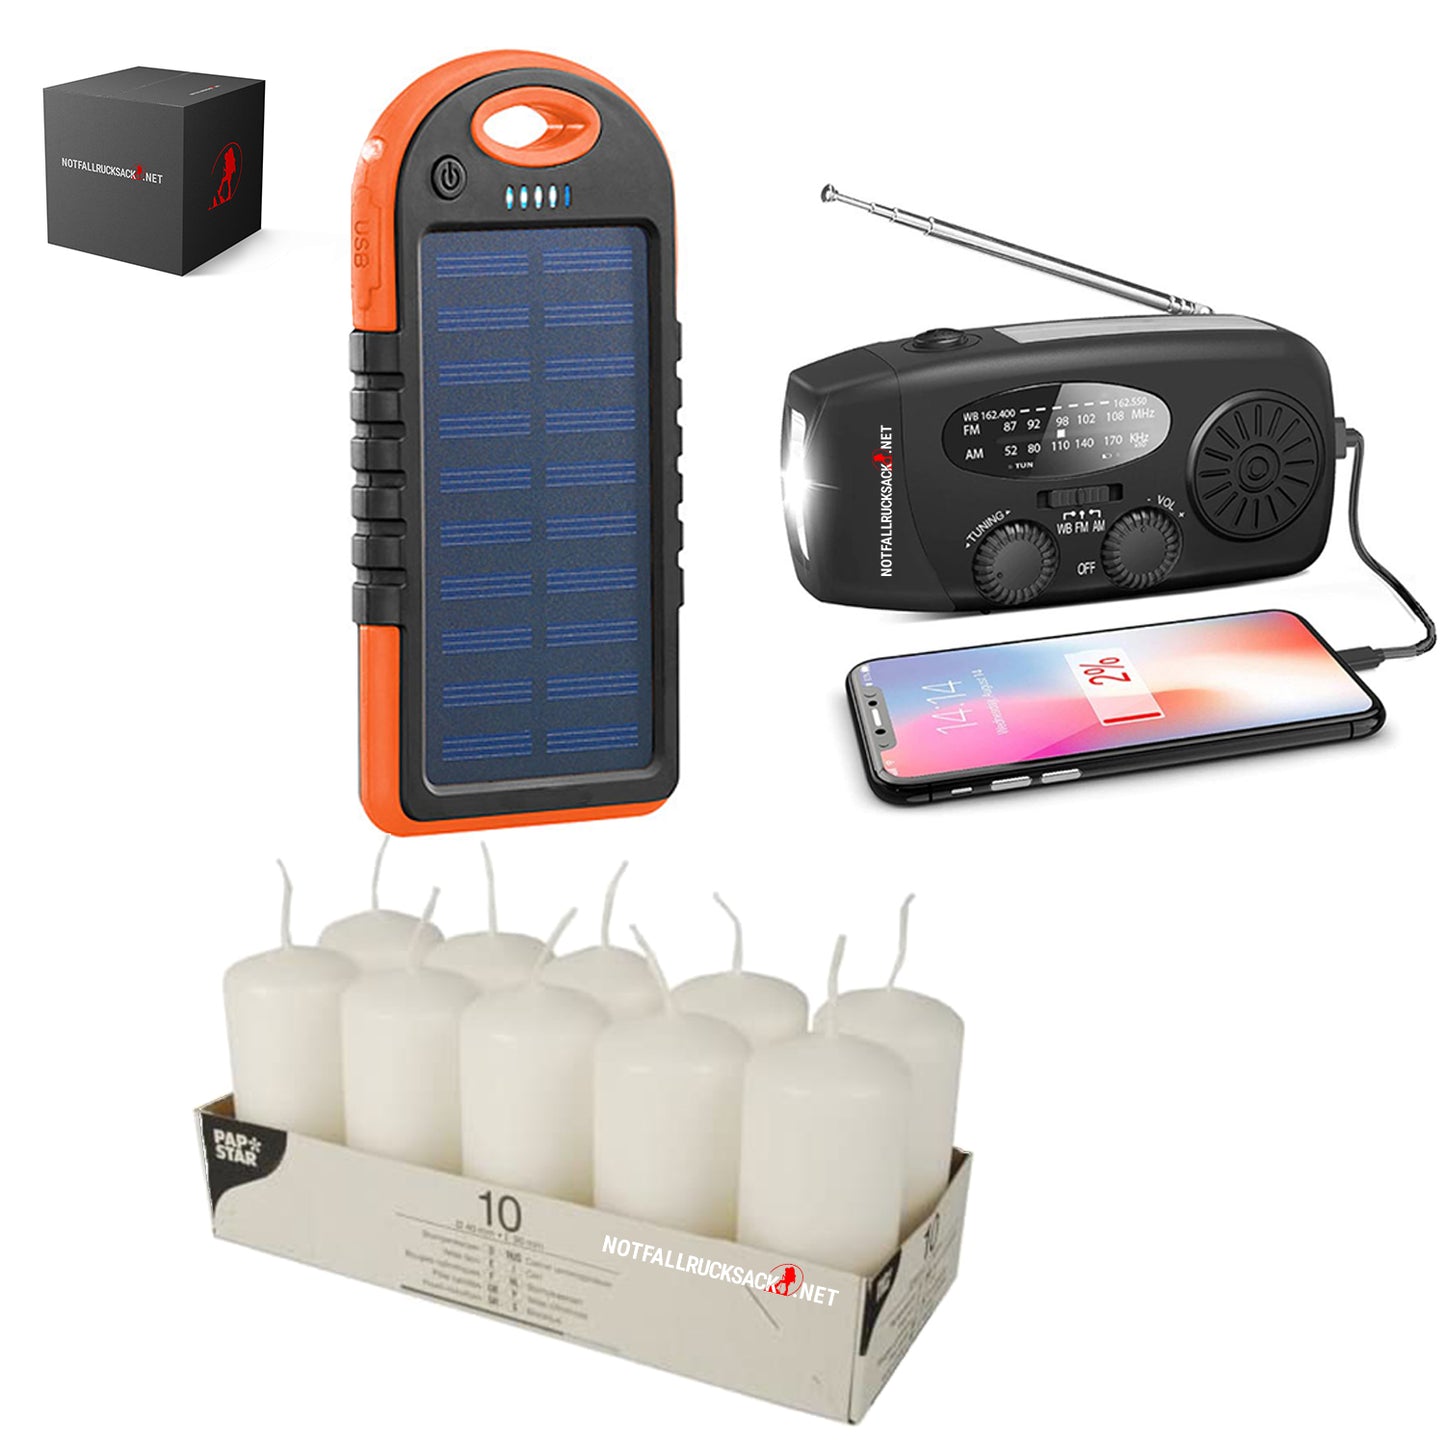 Power Outage Package Basis Noutfall Power Kit